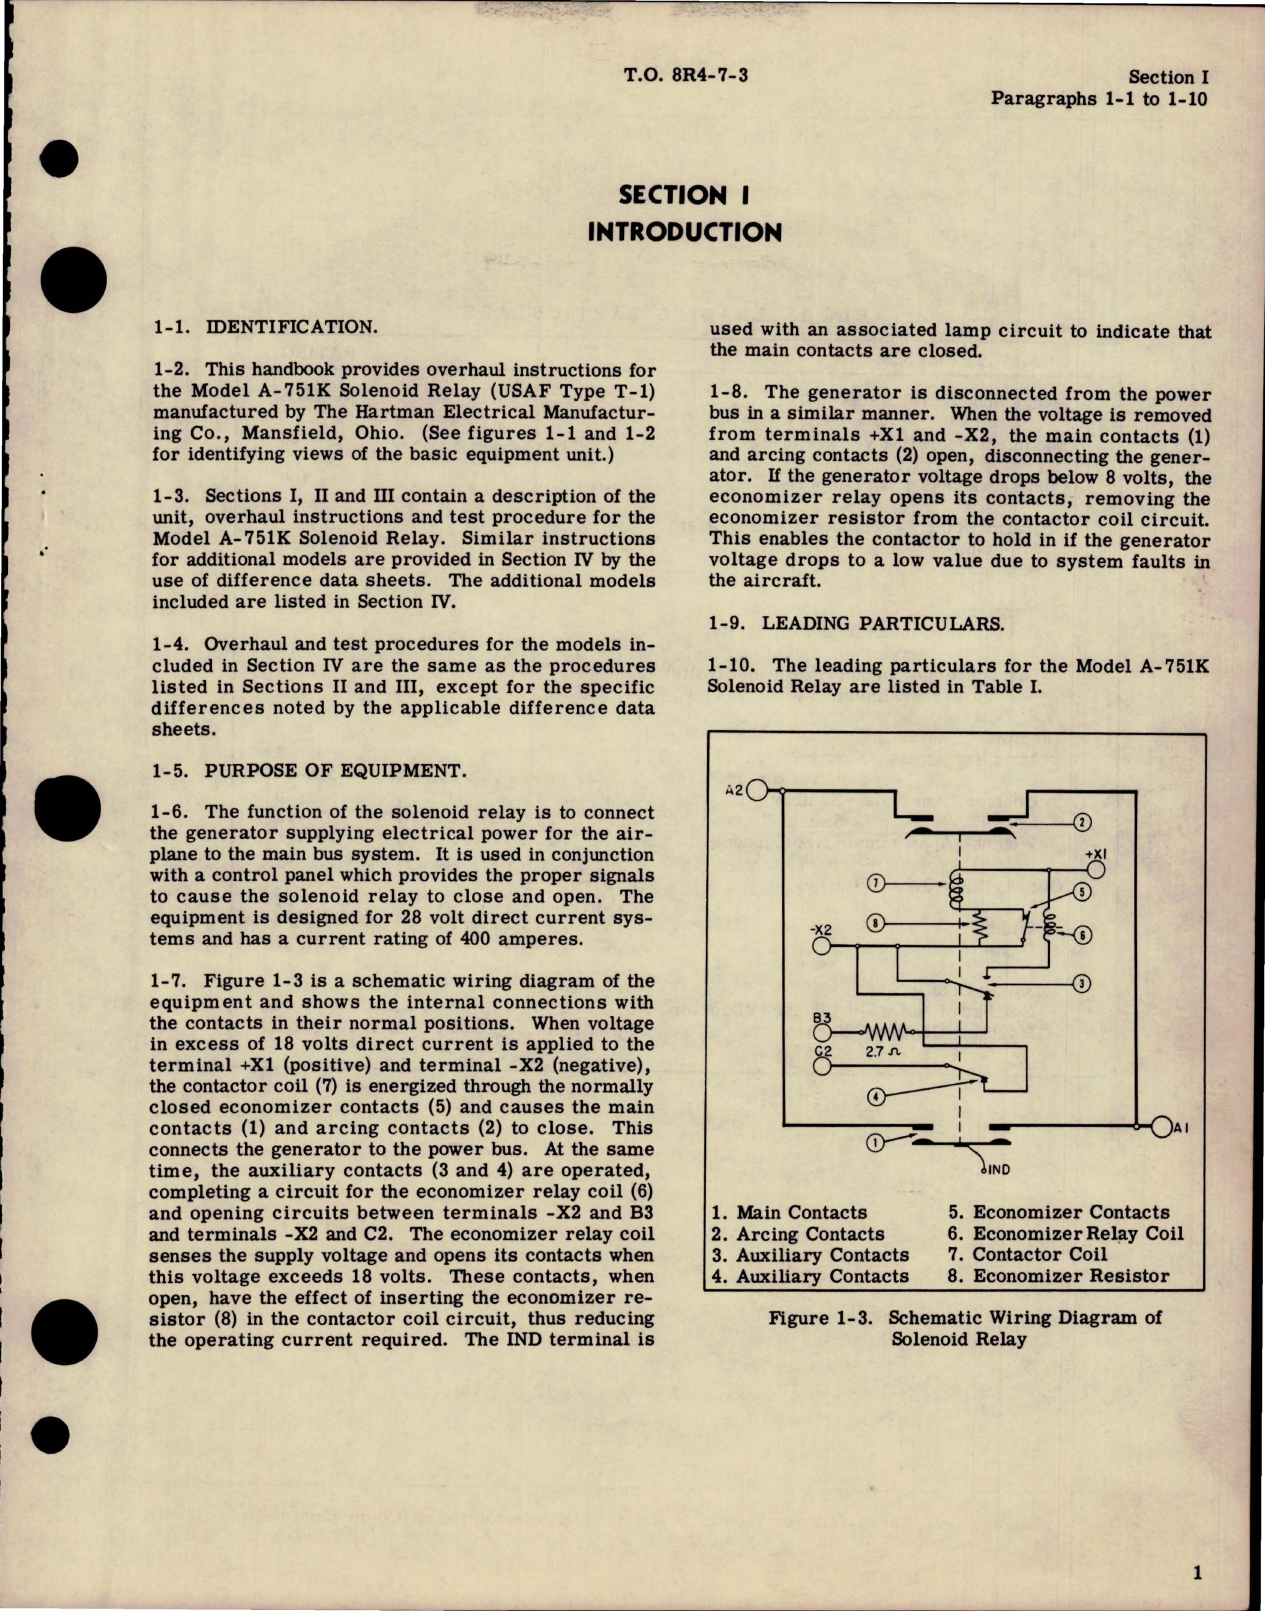 Sample page 5 from AirCorps Library document: Overhaul Instructions for Solenoid Relay - Type T-I